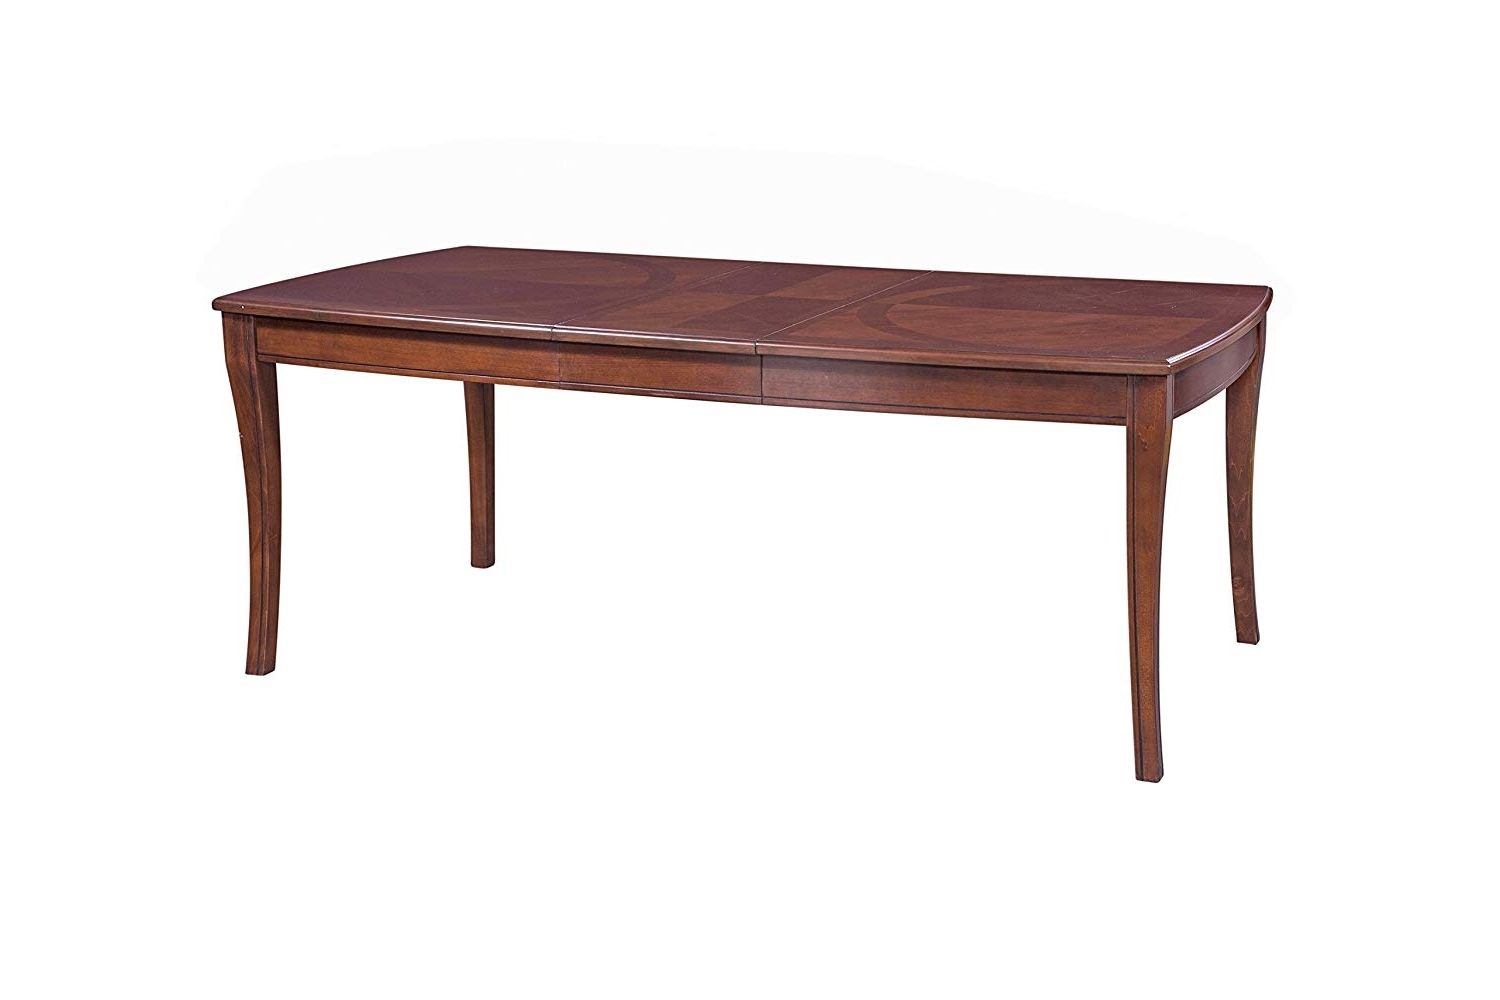 Amazon: Furniture At Home Orion Collection Dining Table, Cherry Inside Most Up To Date Orion Side Chairs (View 18 of 20)